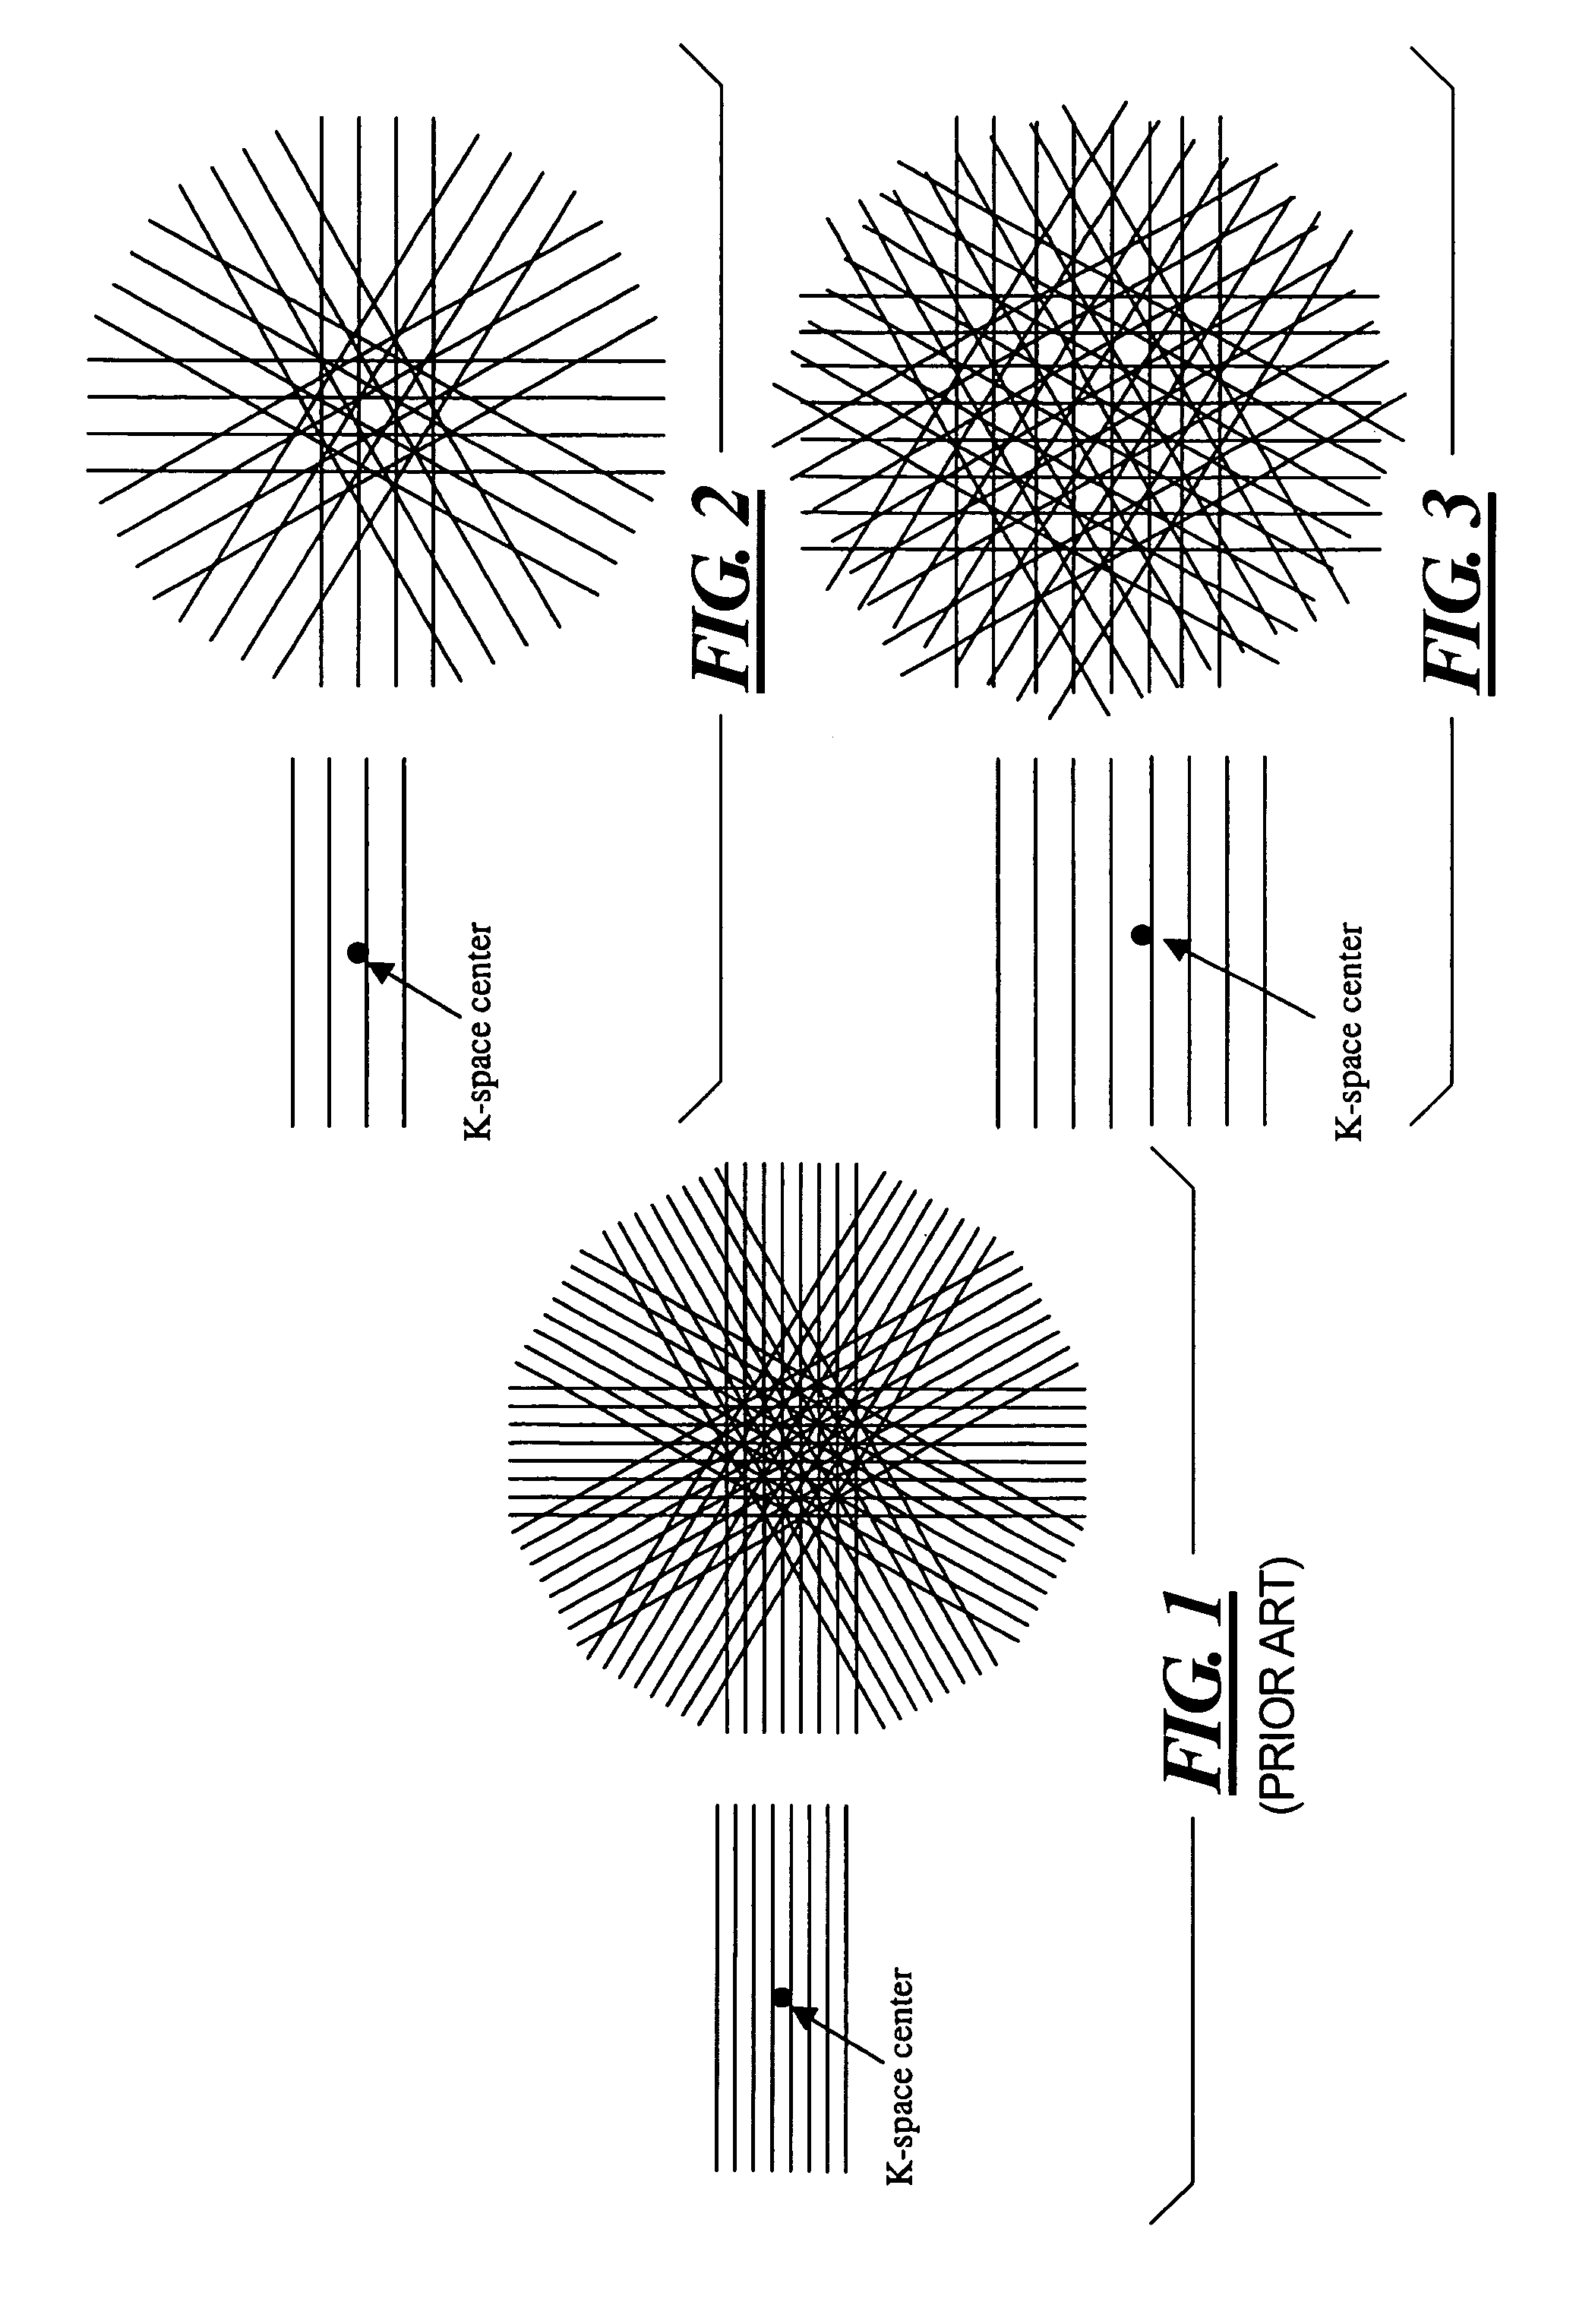 MRI method and apparatus for faster data acquisition or better motion artifact reduction